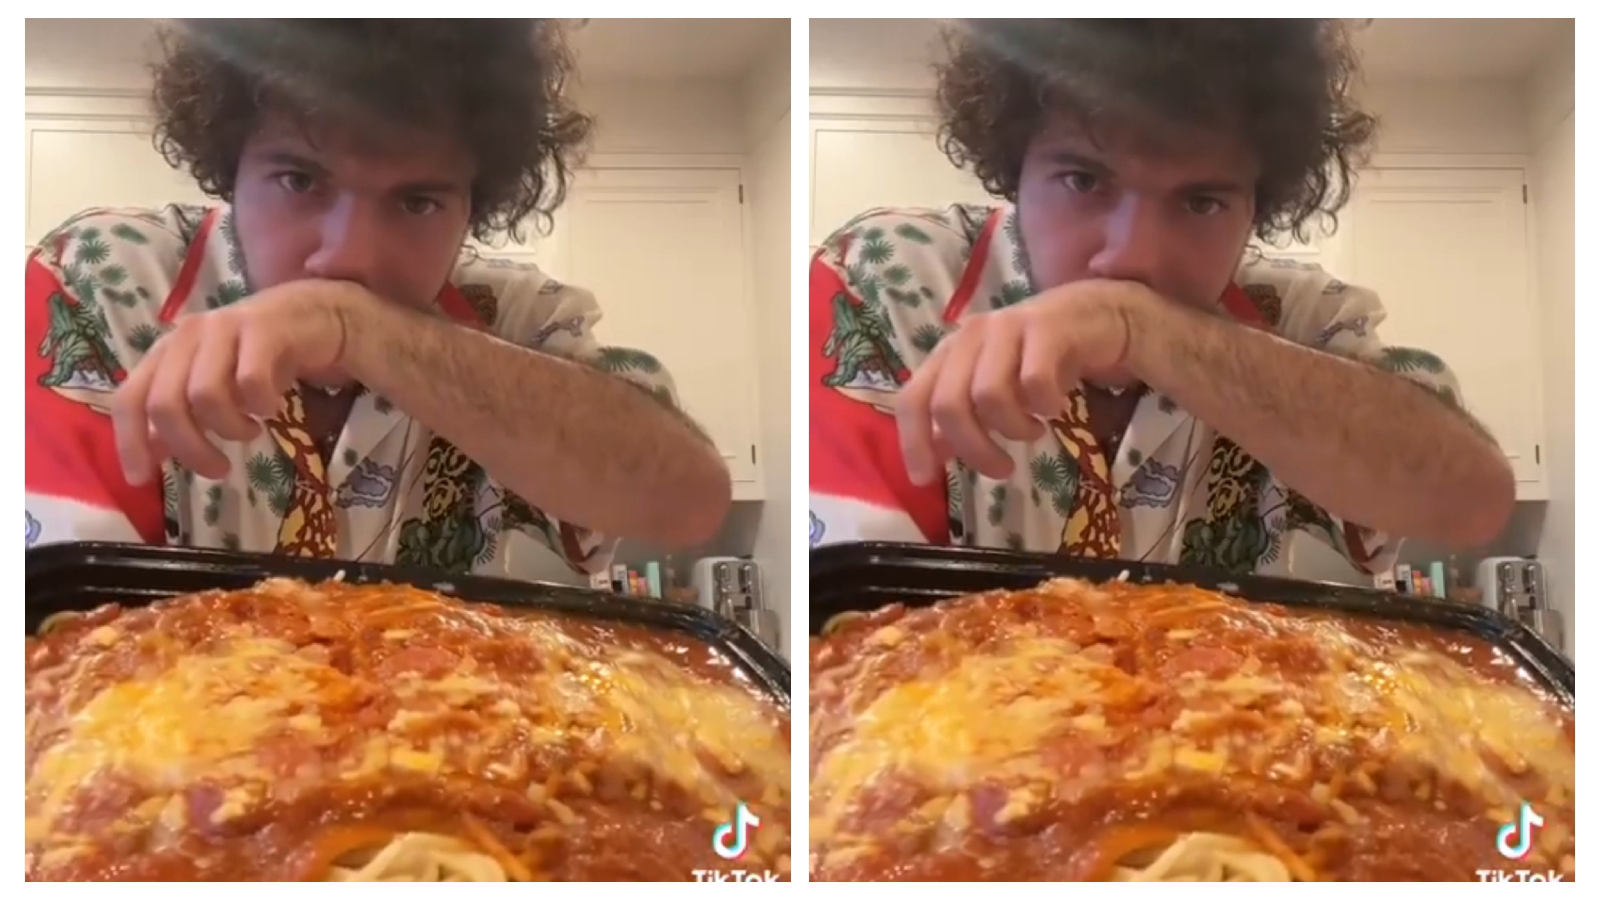 VIDEO Benny Blanco spits back spaghetti into the plate while